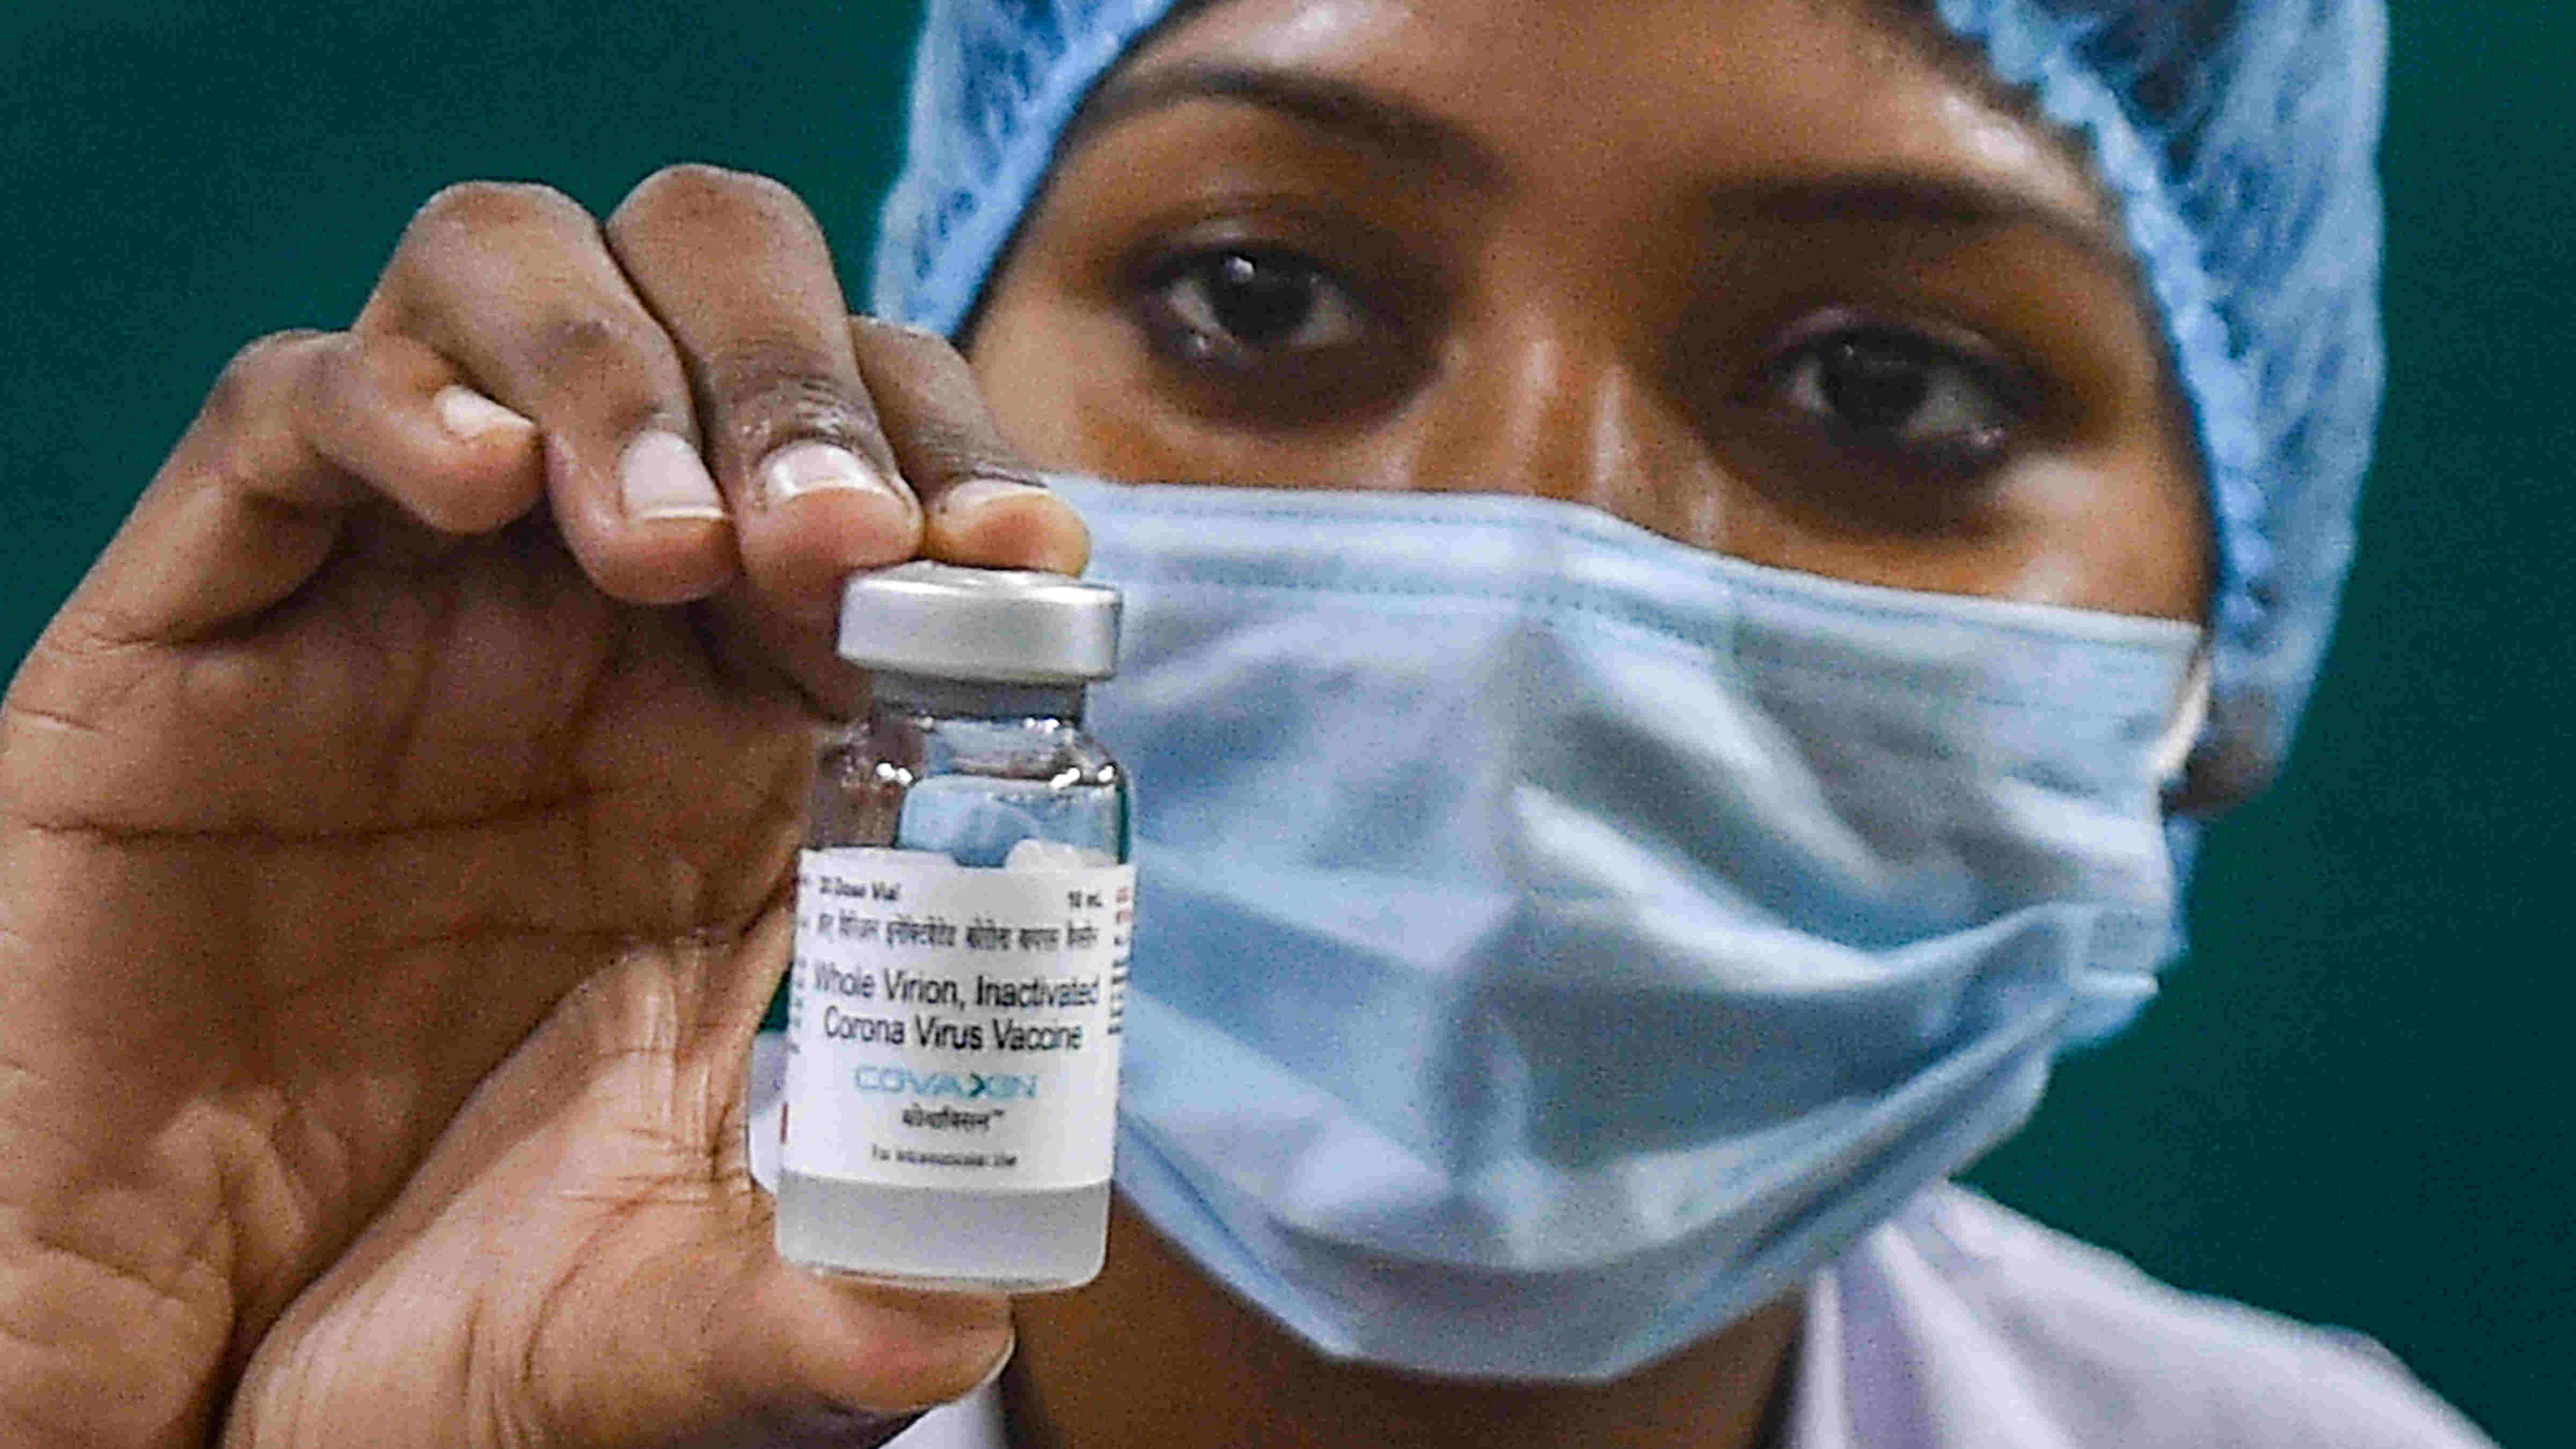 A medic shows a vial containing doses of Covaxin during a COVID-19 vaccination drive at a government hospital, in Kolkata, Wednesday, Feb. 3, 2021.